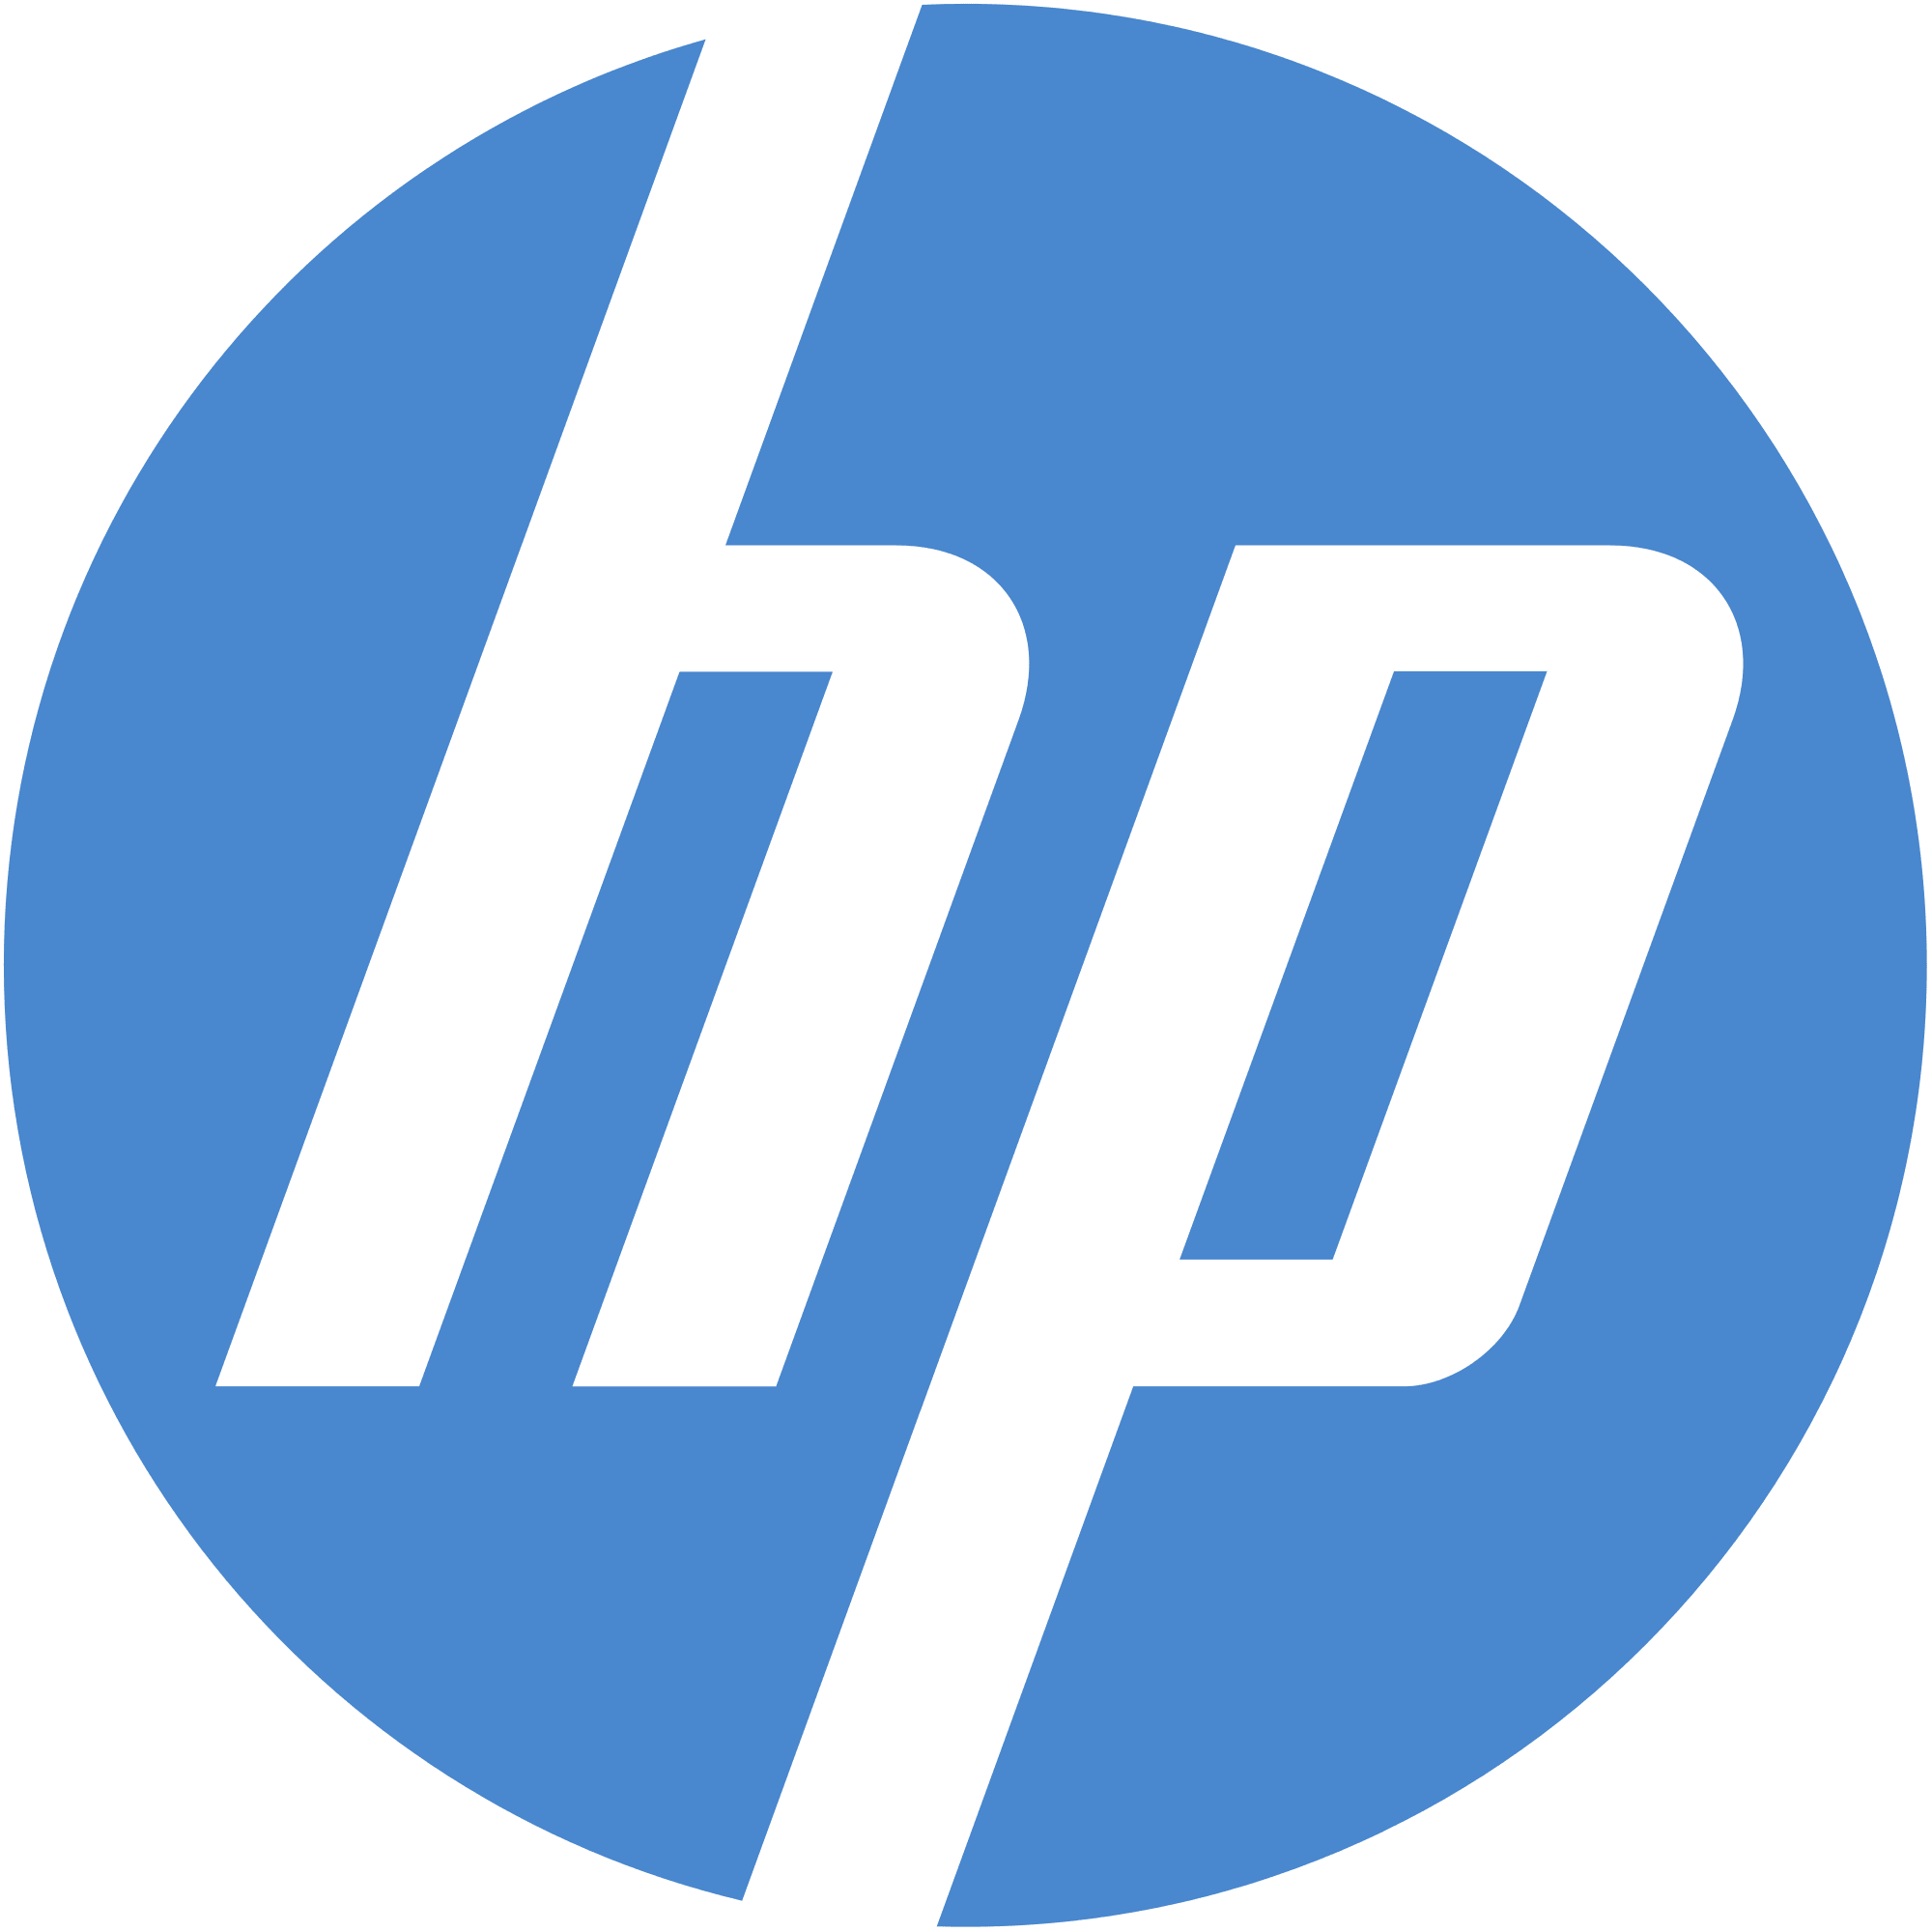 Hp psc 1510 all in one printer software download